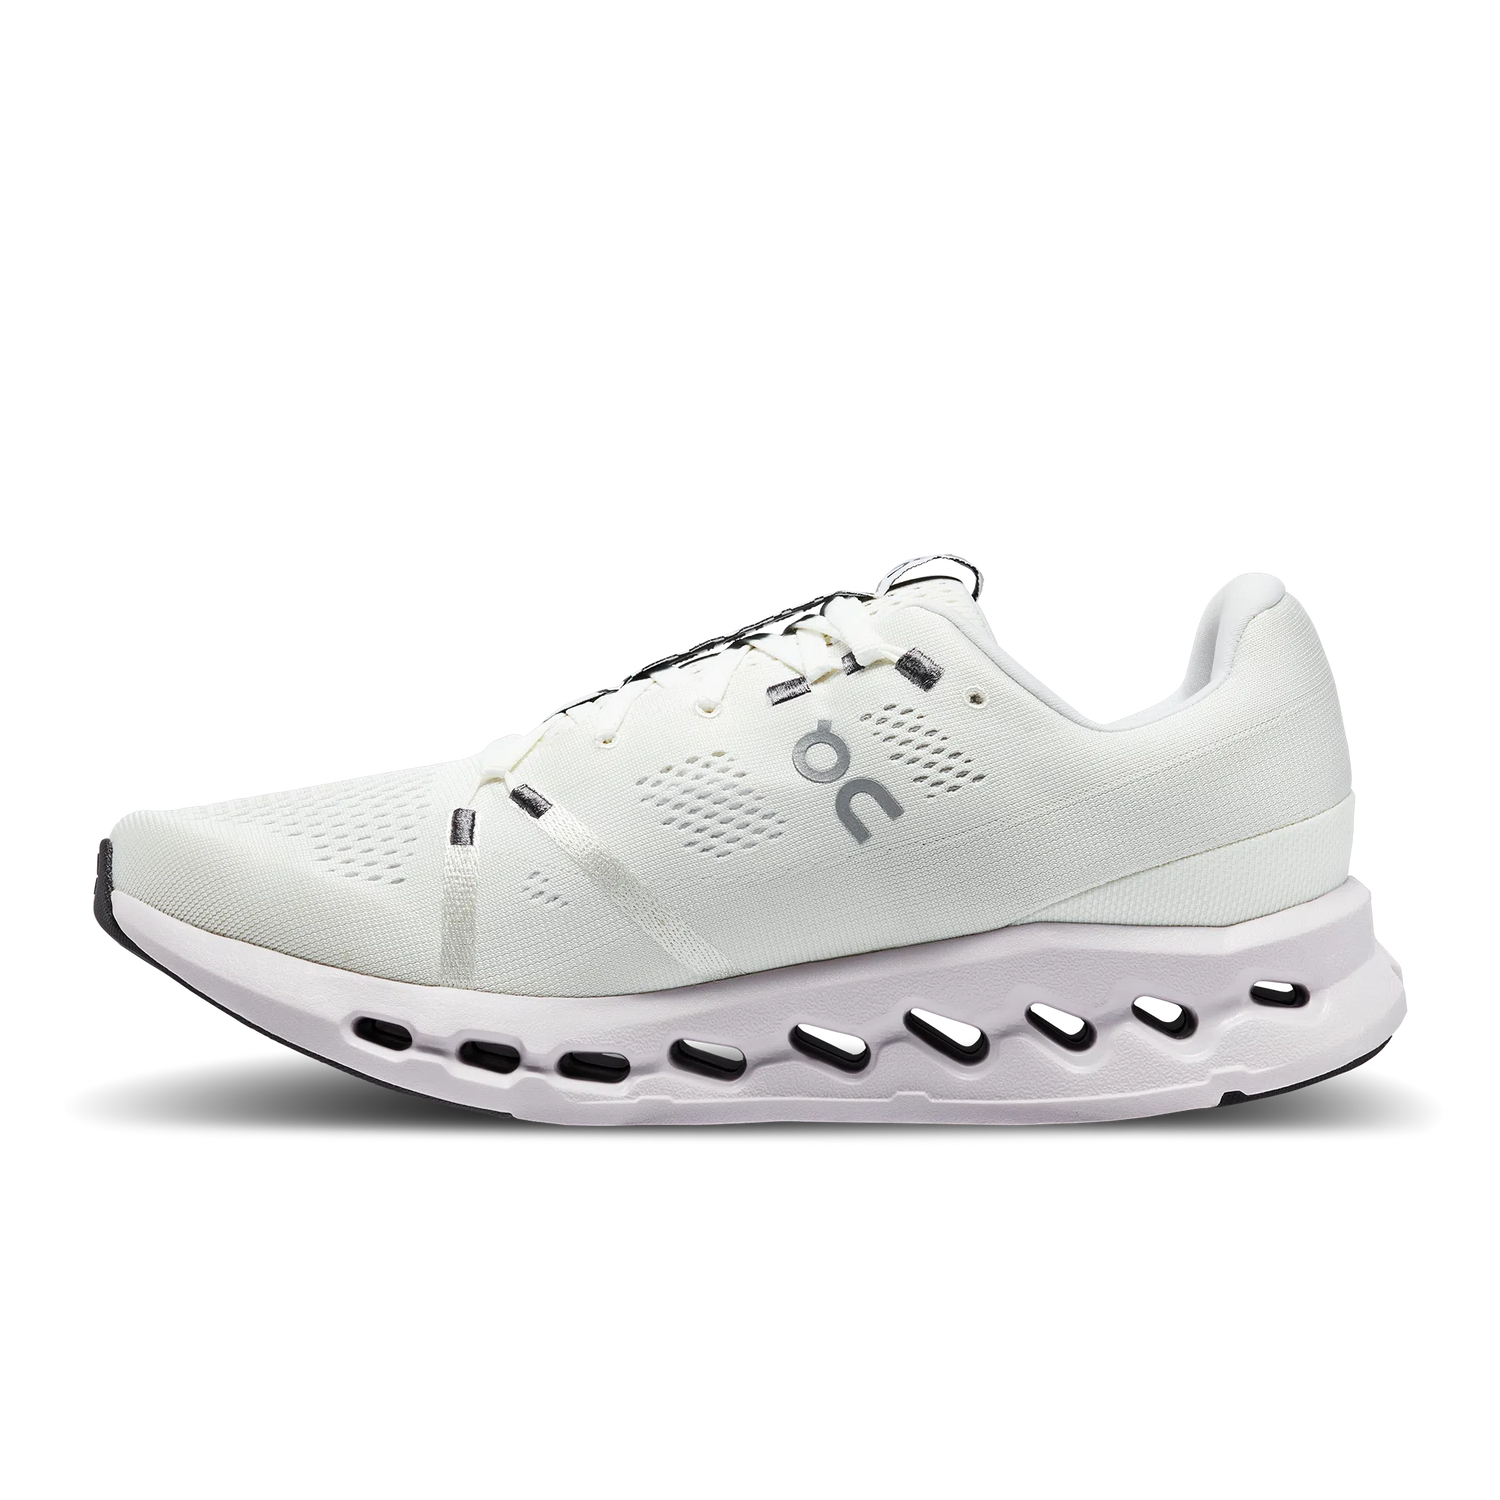 On Running - Cloud Surfer WHITE-LOTABY